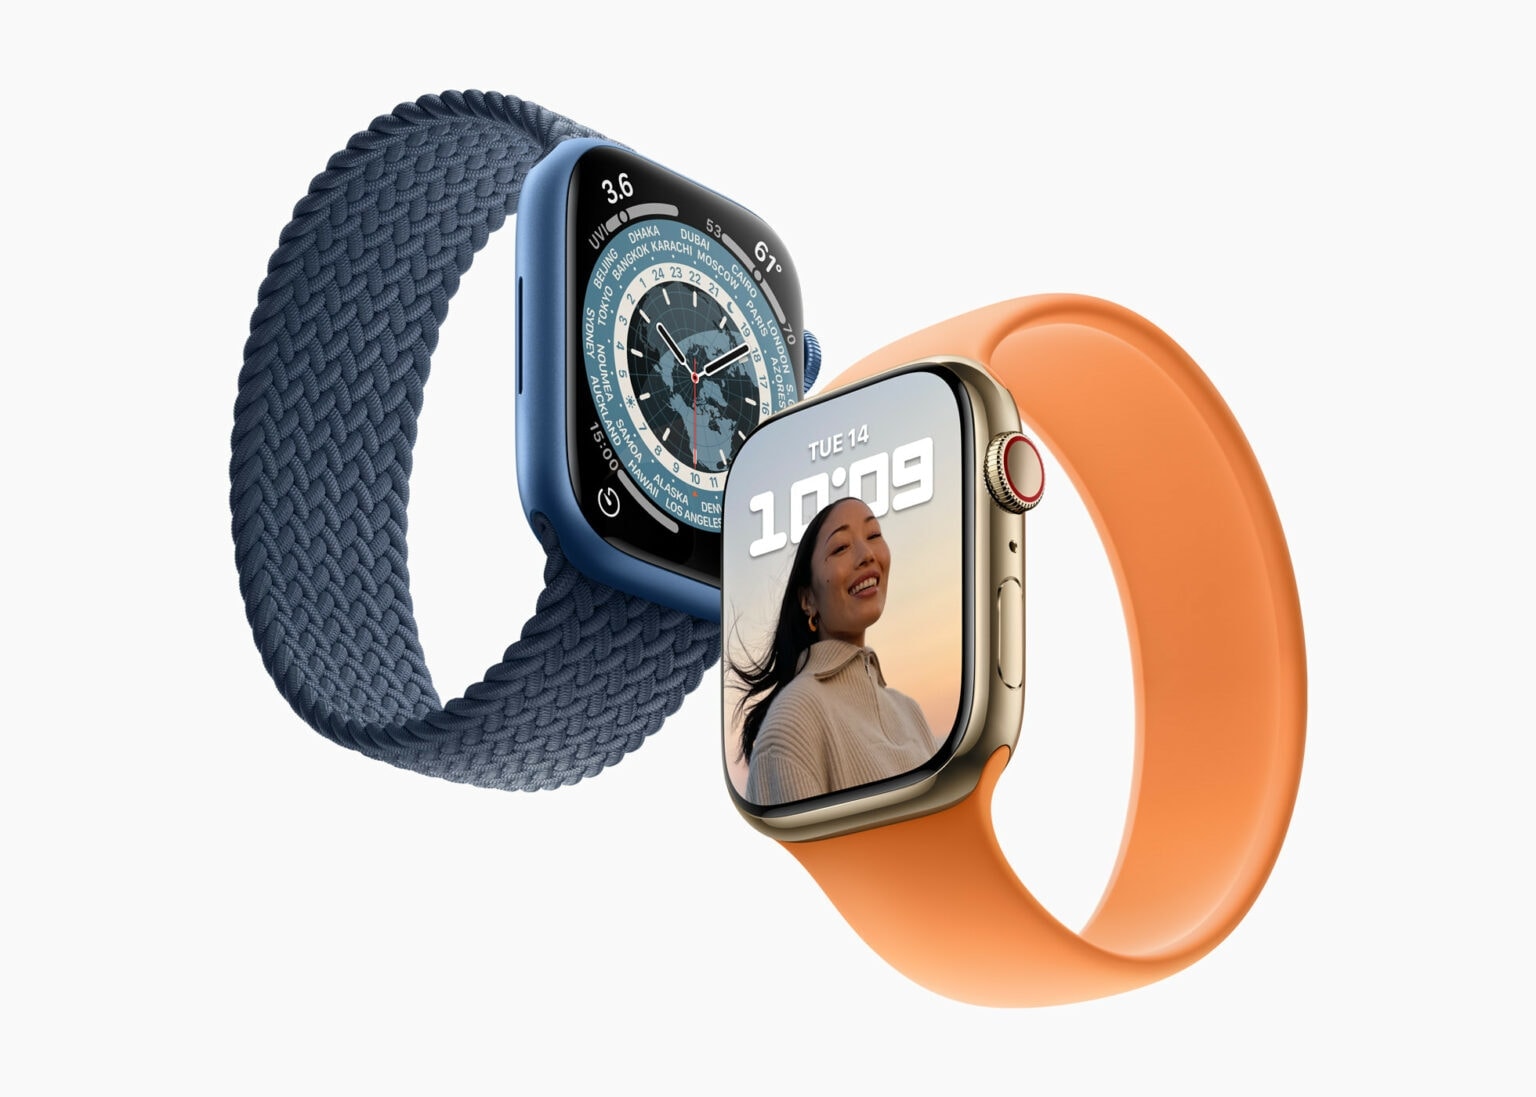 Apple Watch sales increasingly dominate globally.